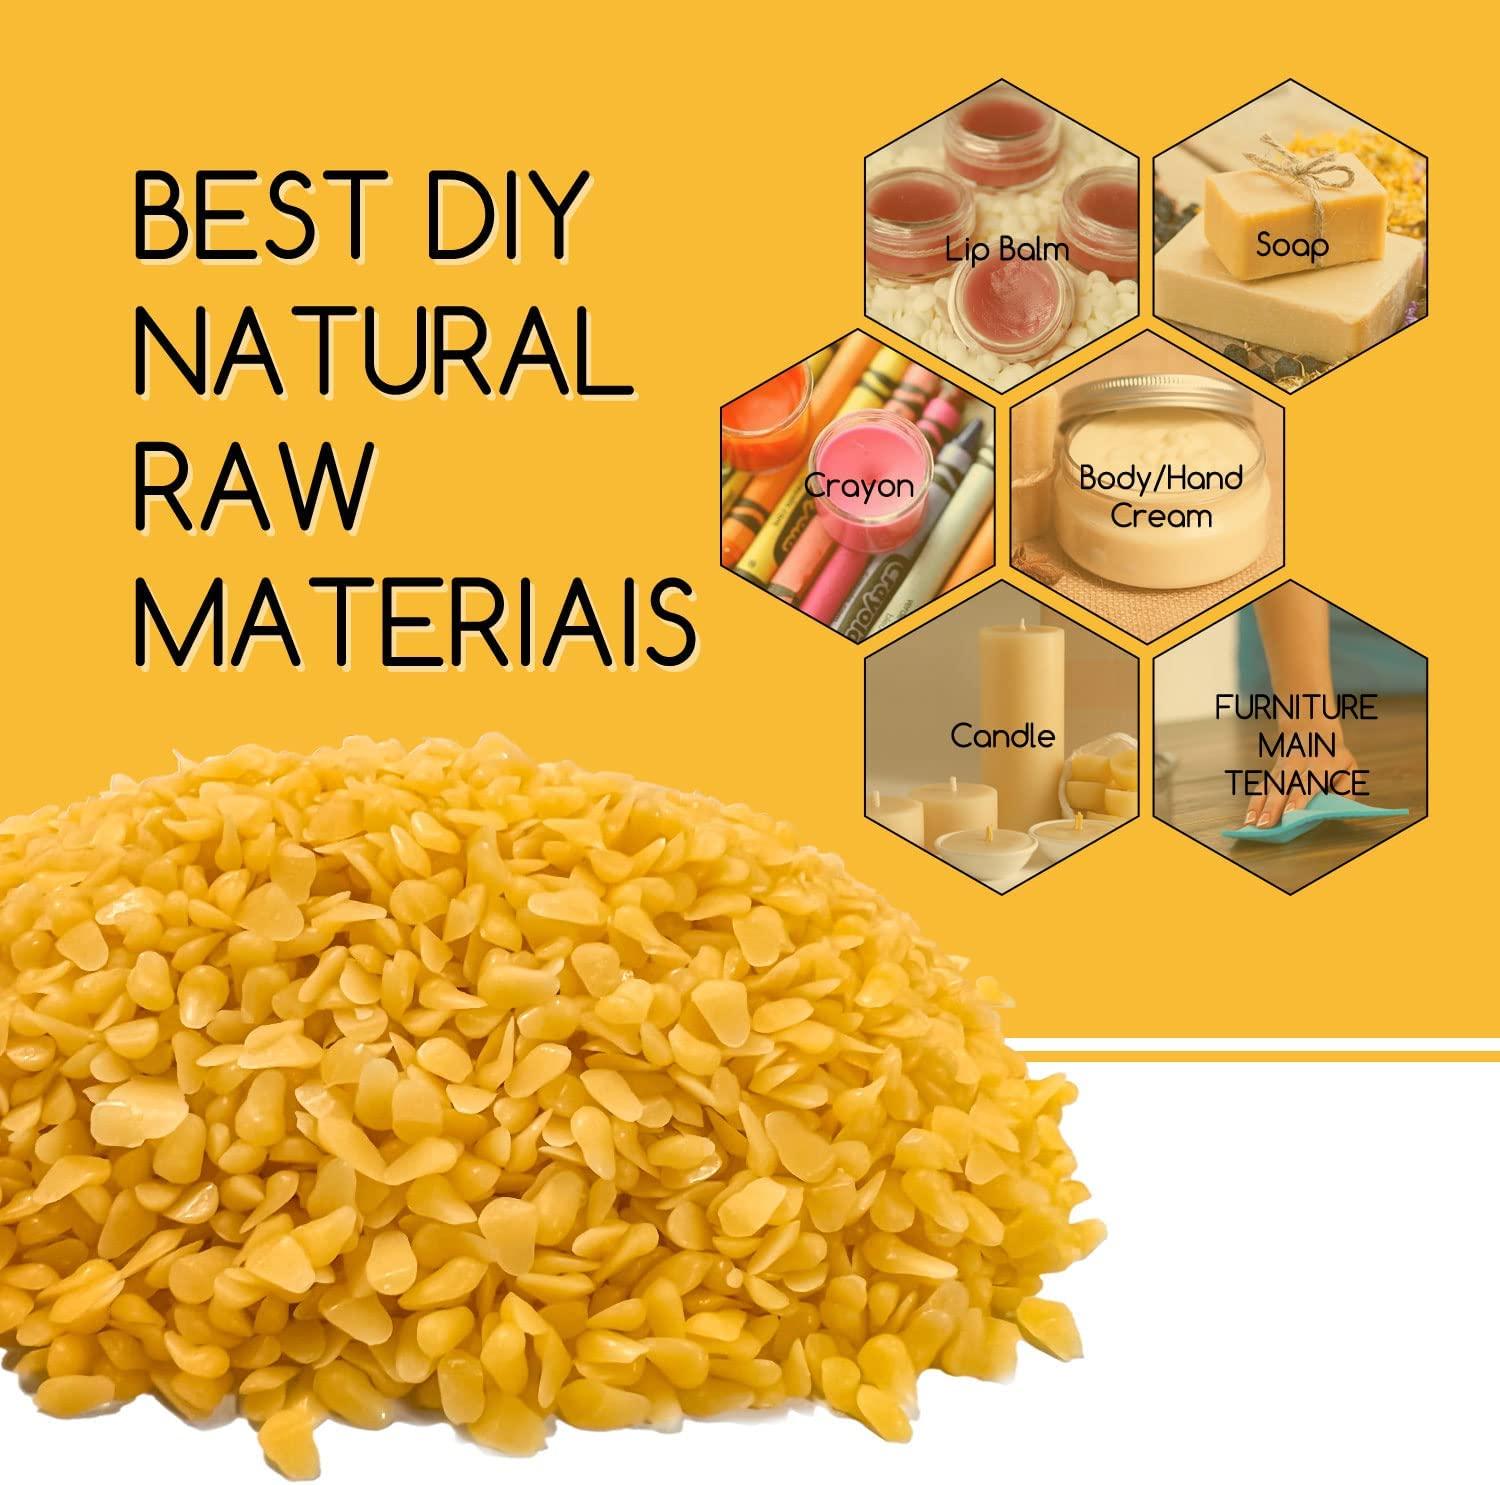 Where to Buy Beeswax Pellets in Singapore - Singapore Soap Supplies